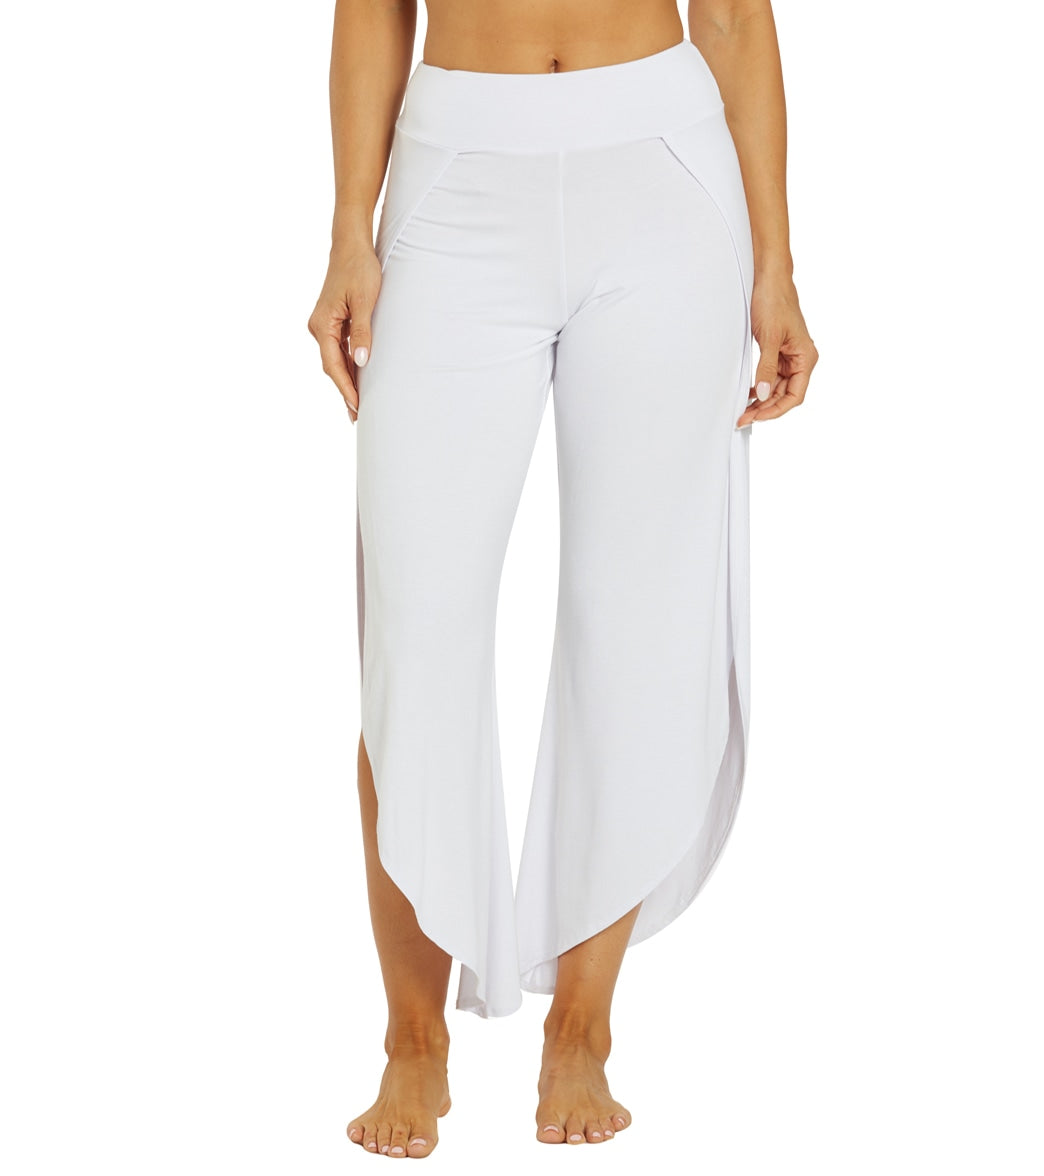 In Stores: Align Pants + All The Right Places Crops + Bhakti Yoga